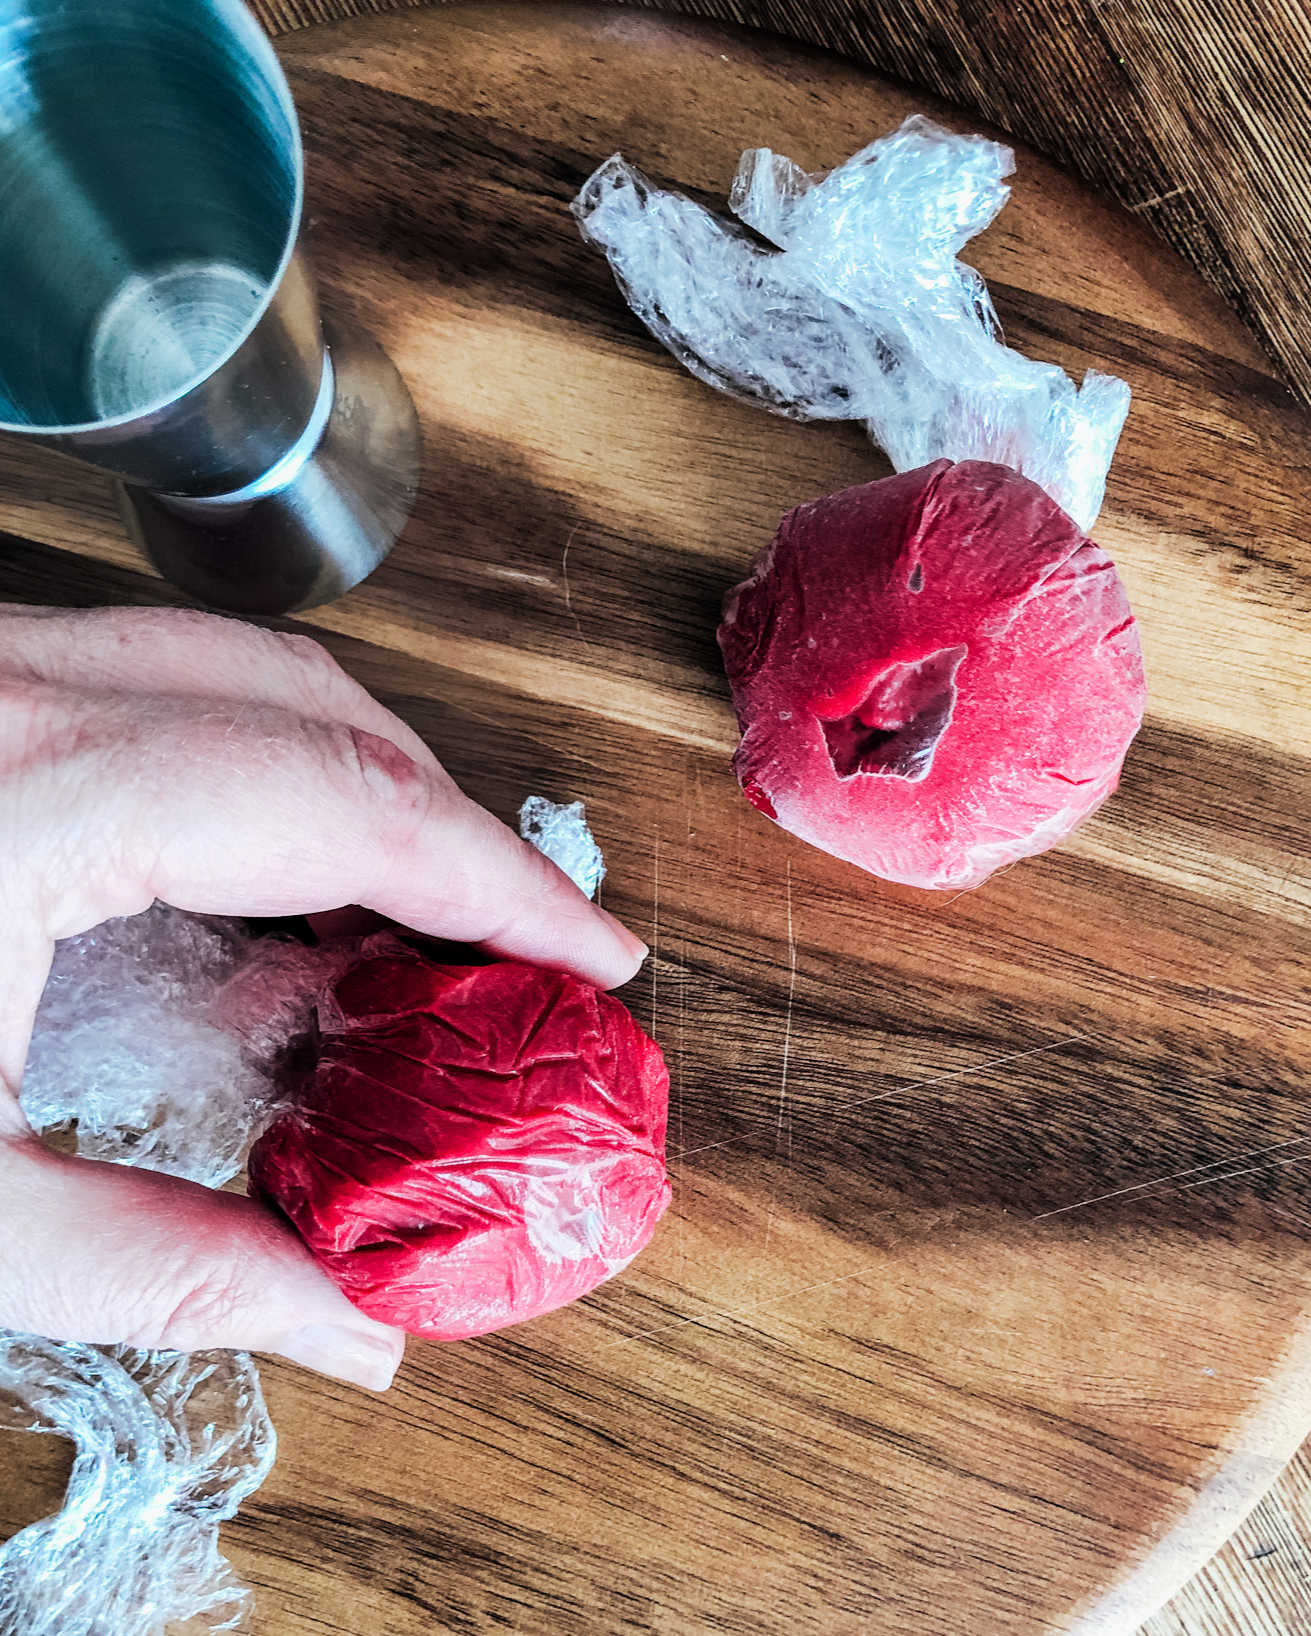 To prepare your sorbet scoop into balls, roll and wrap in cling film and place in the freezer until you are ready to use them